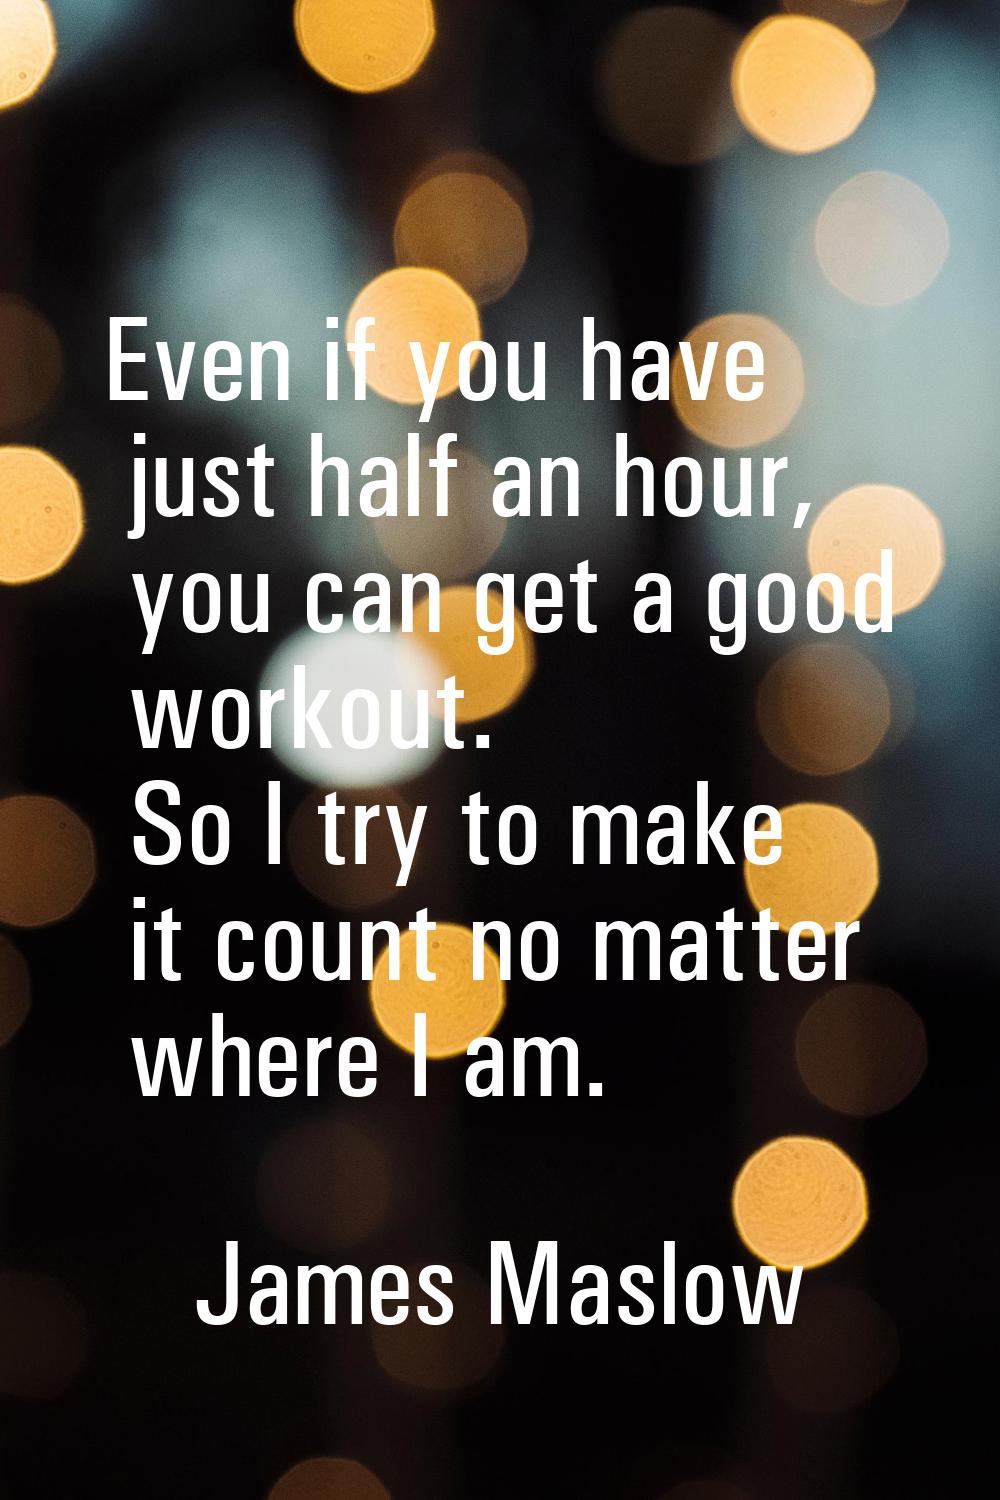 Even if you have just half an hour, you can get a good workout. So I try to make it count no matter